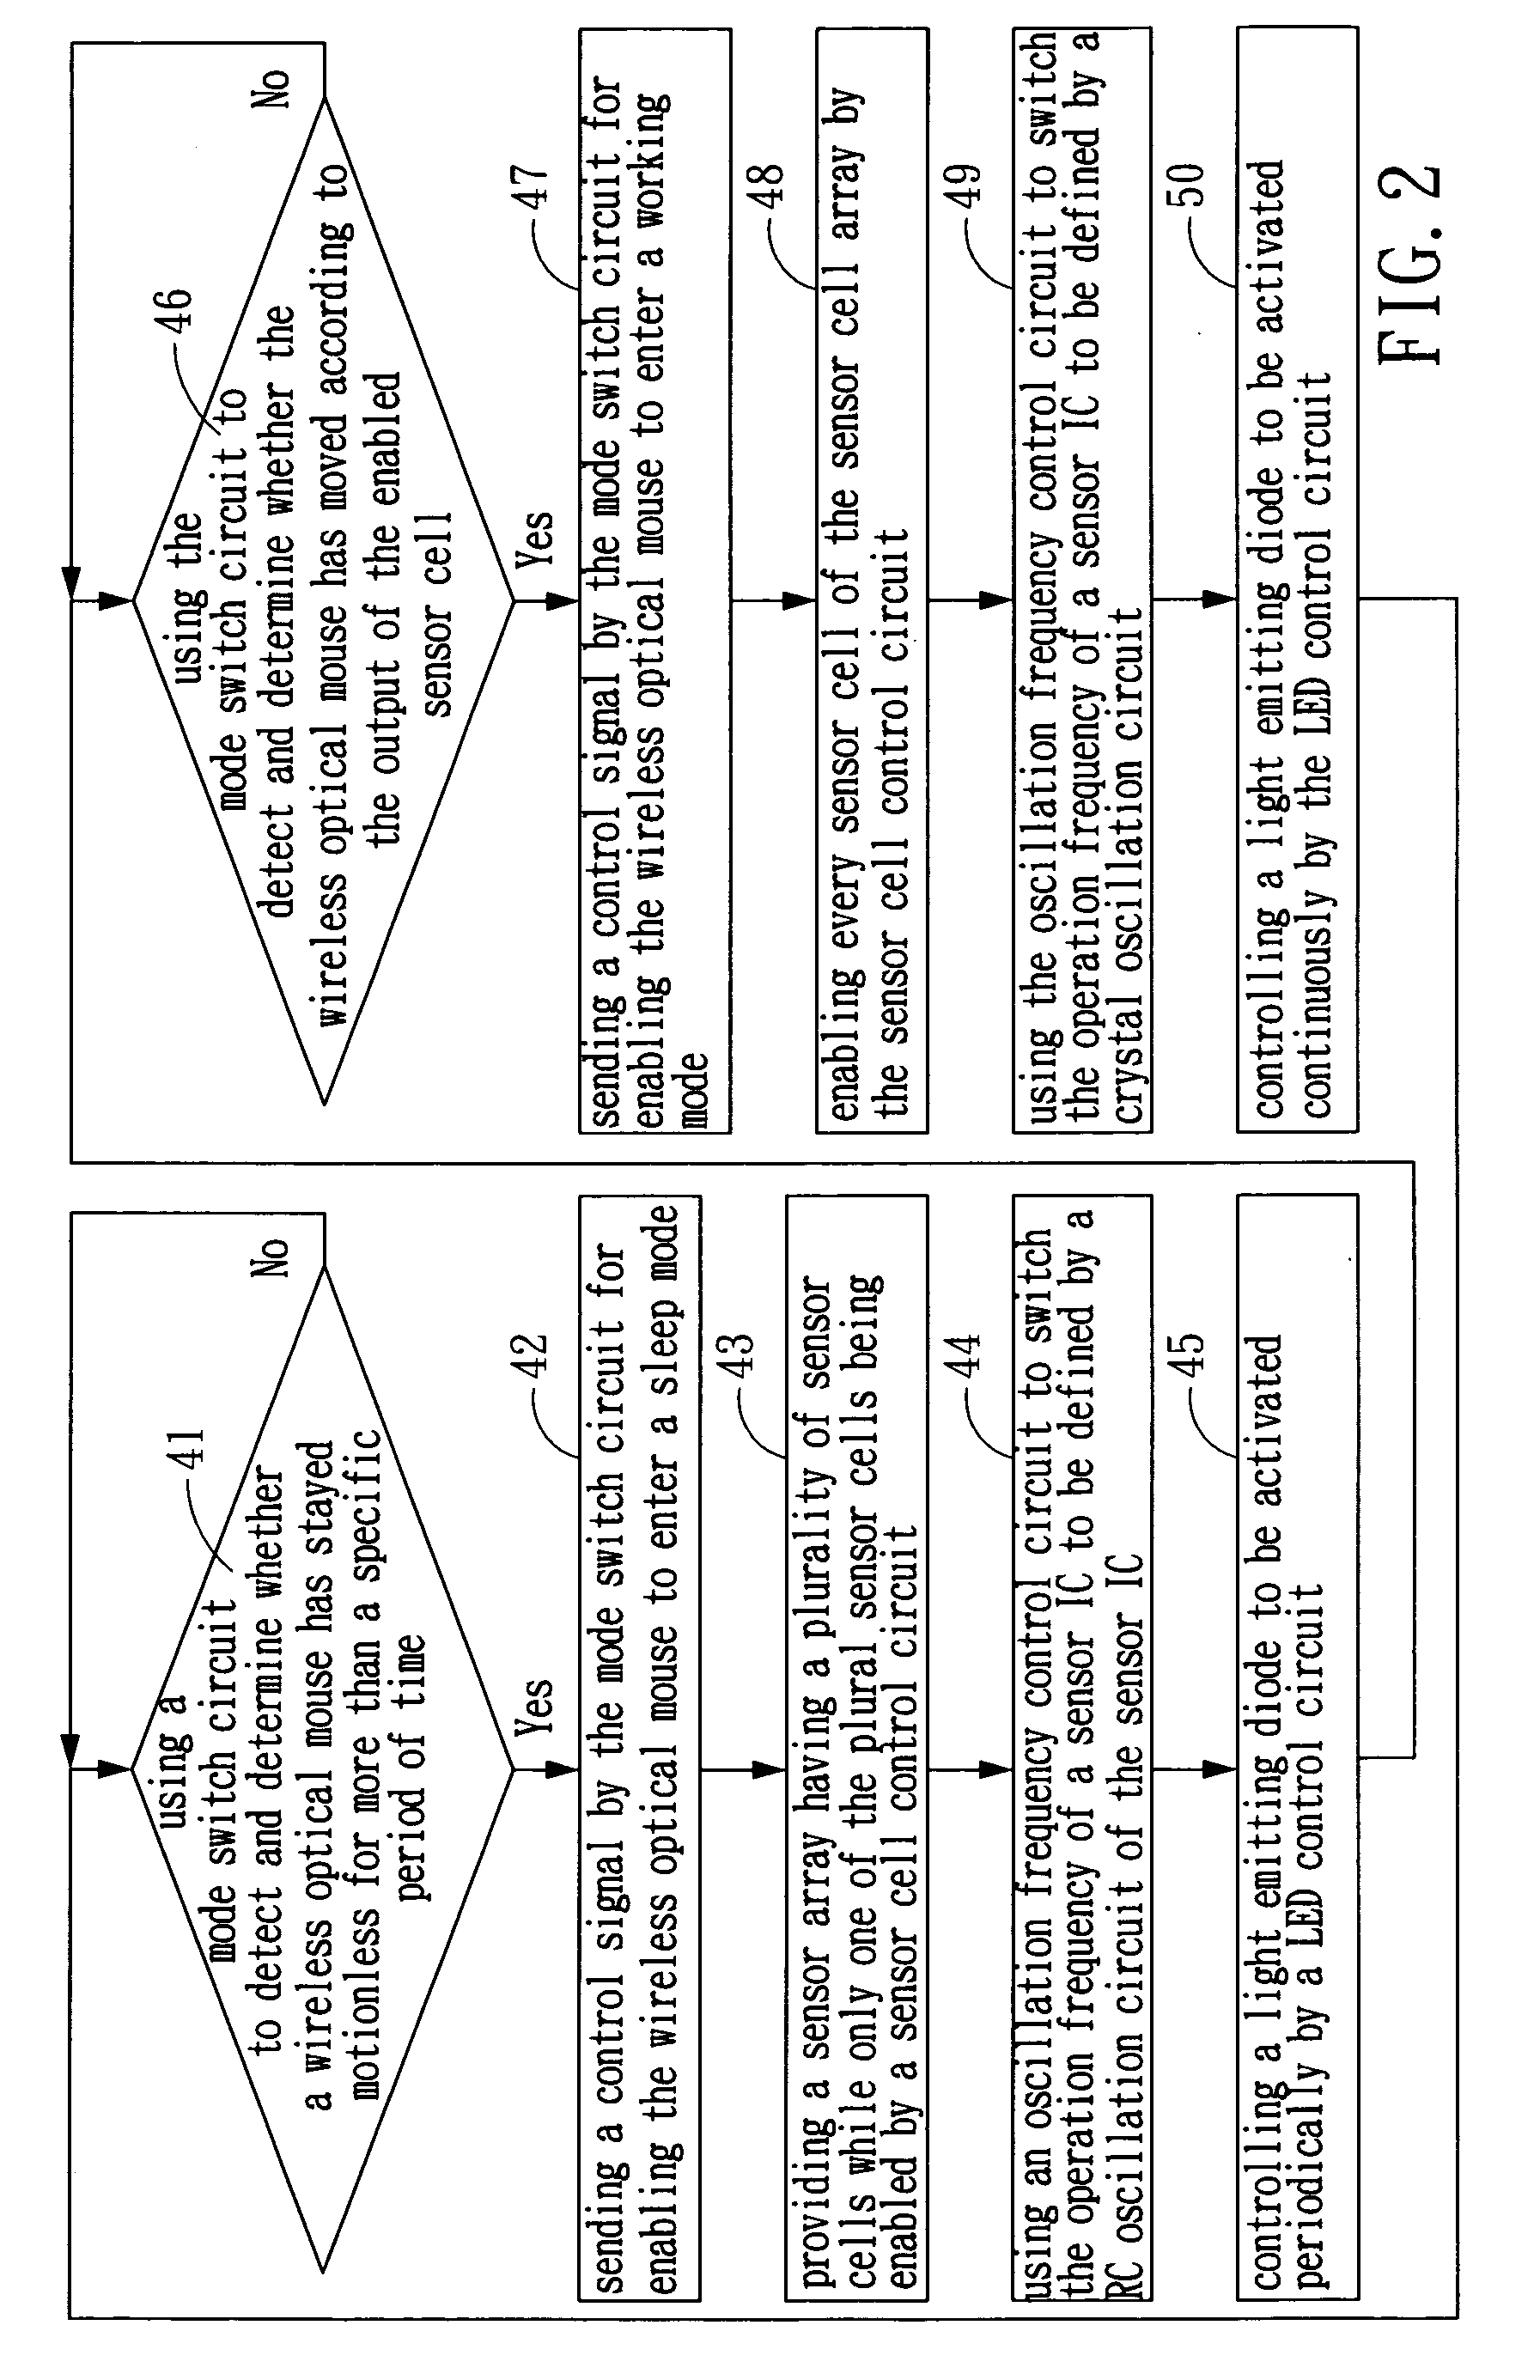 Power saving method and apparatus for wireless optical mouse